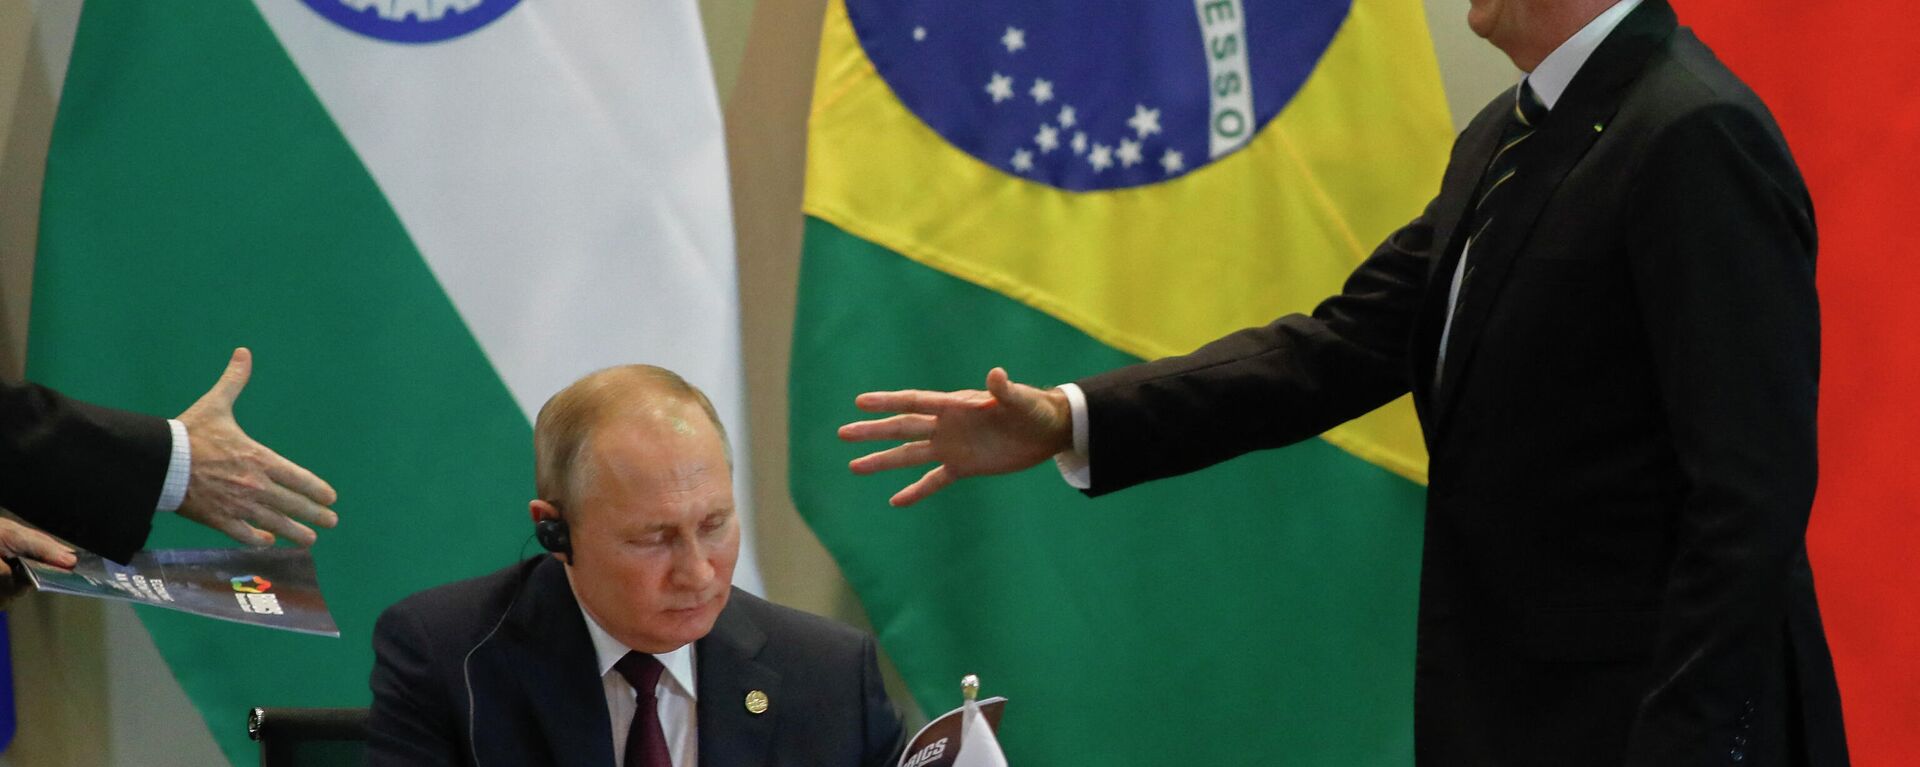 Brazil's President Jair Bolsonaro (R) and Russian President Vladimir Putin (L) attend to  a meeting with members of the Business Council and management of the New Development Bank during the BRICS Summit in Brasilia, November 14, 2019 - Sputnik Africa, 1920, 21.04.2023